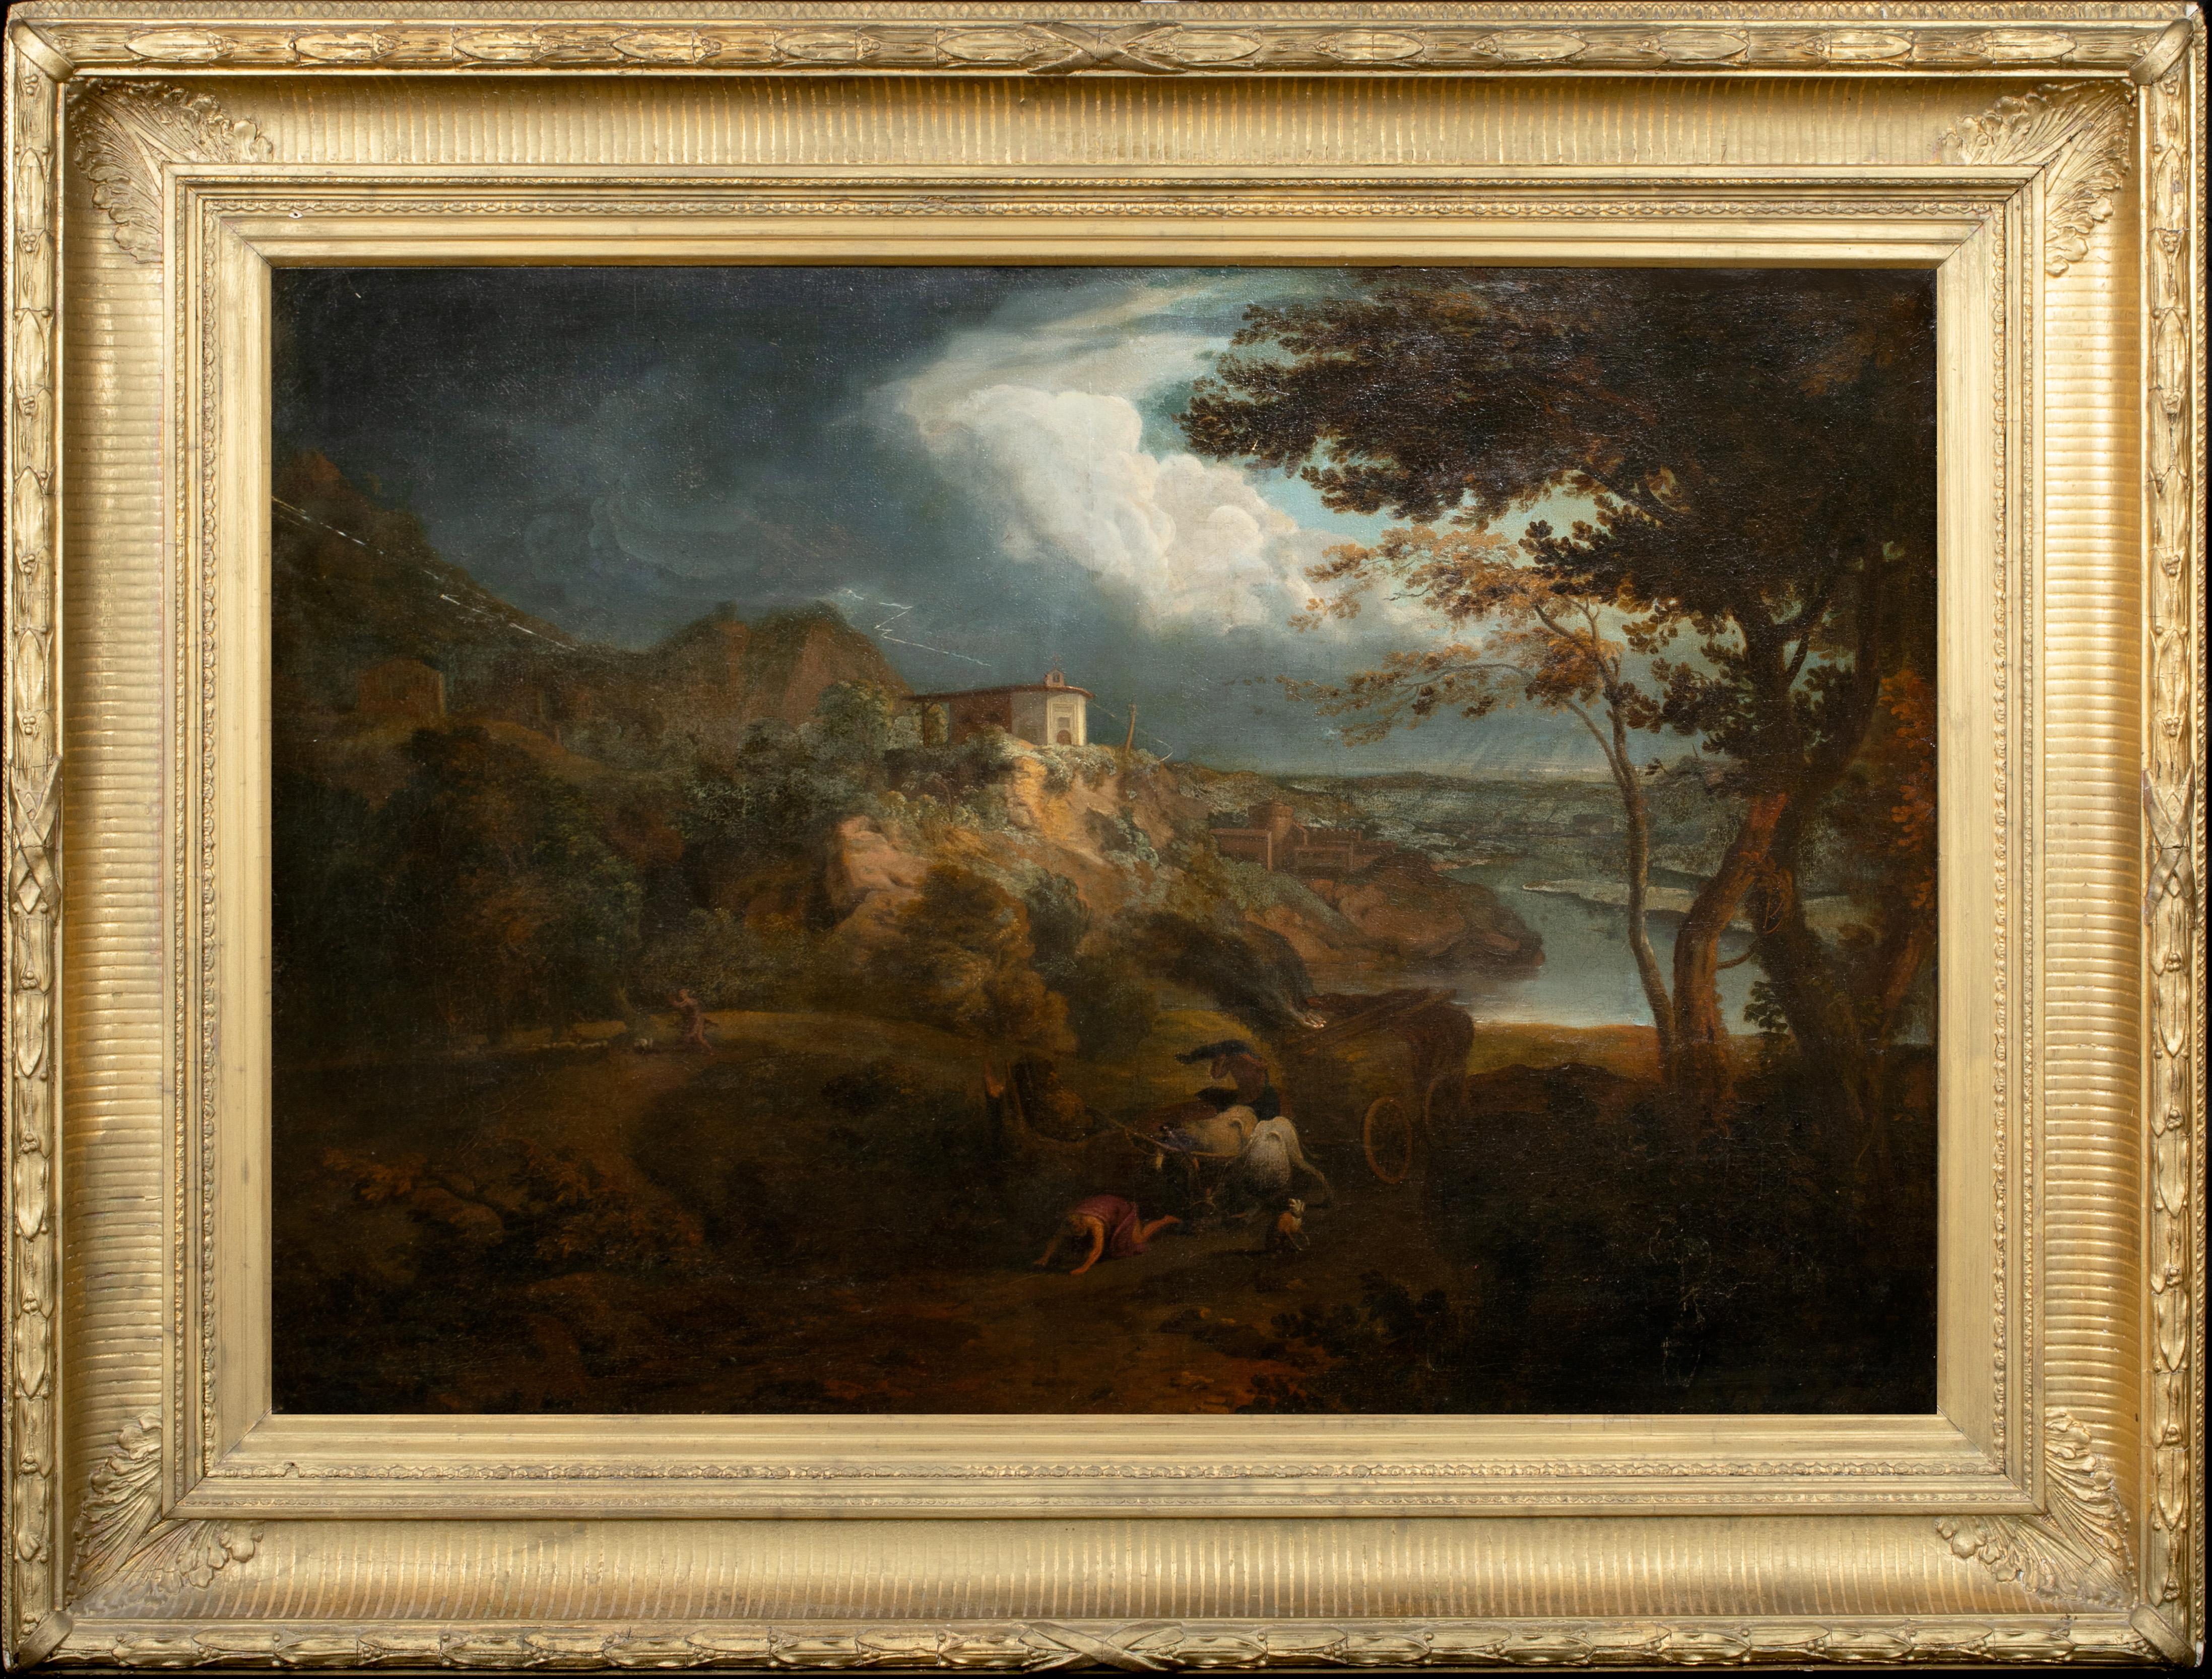 Unknown Landscape Painting - The Storm, 17th Century 